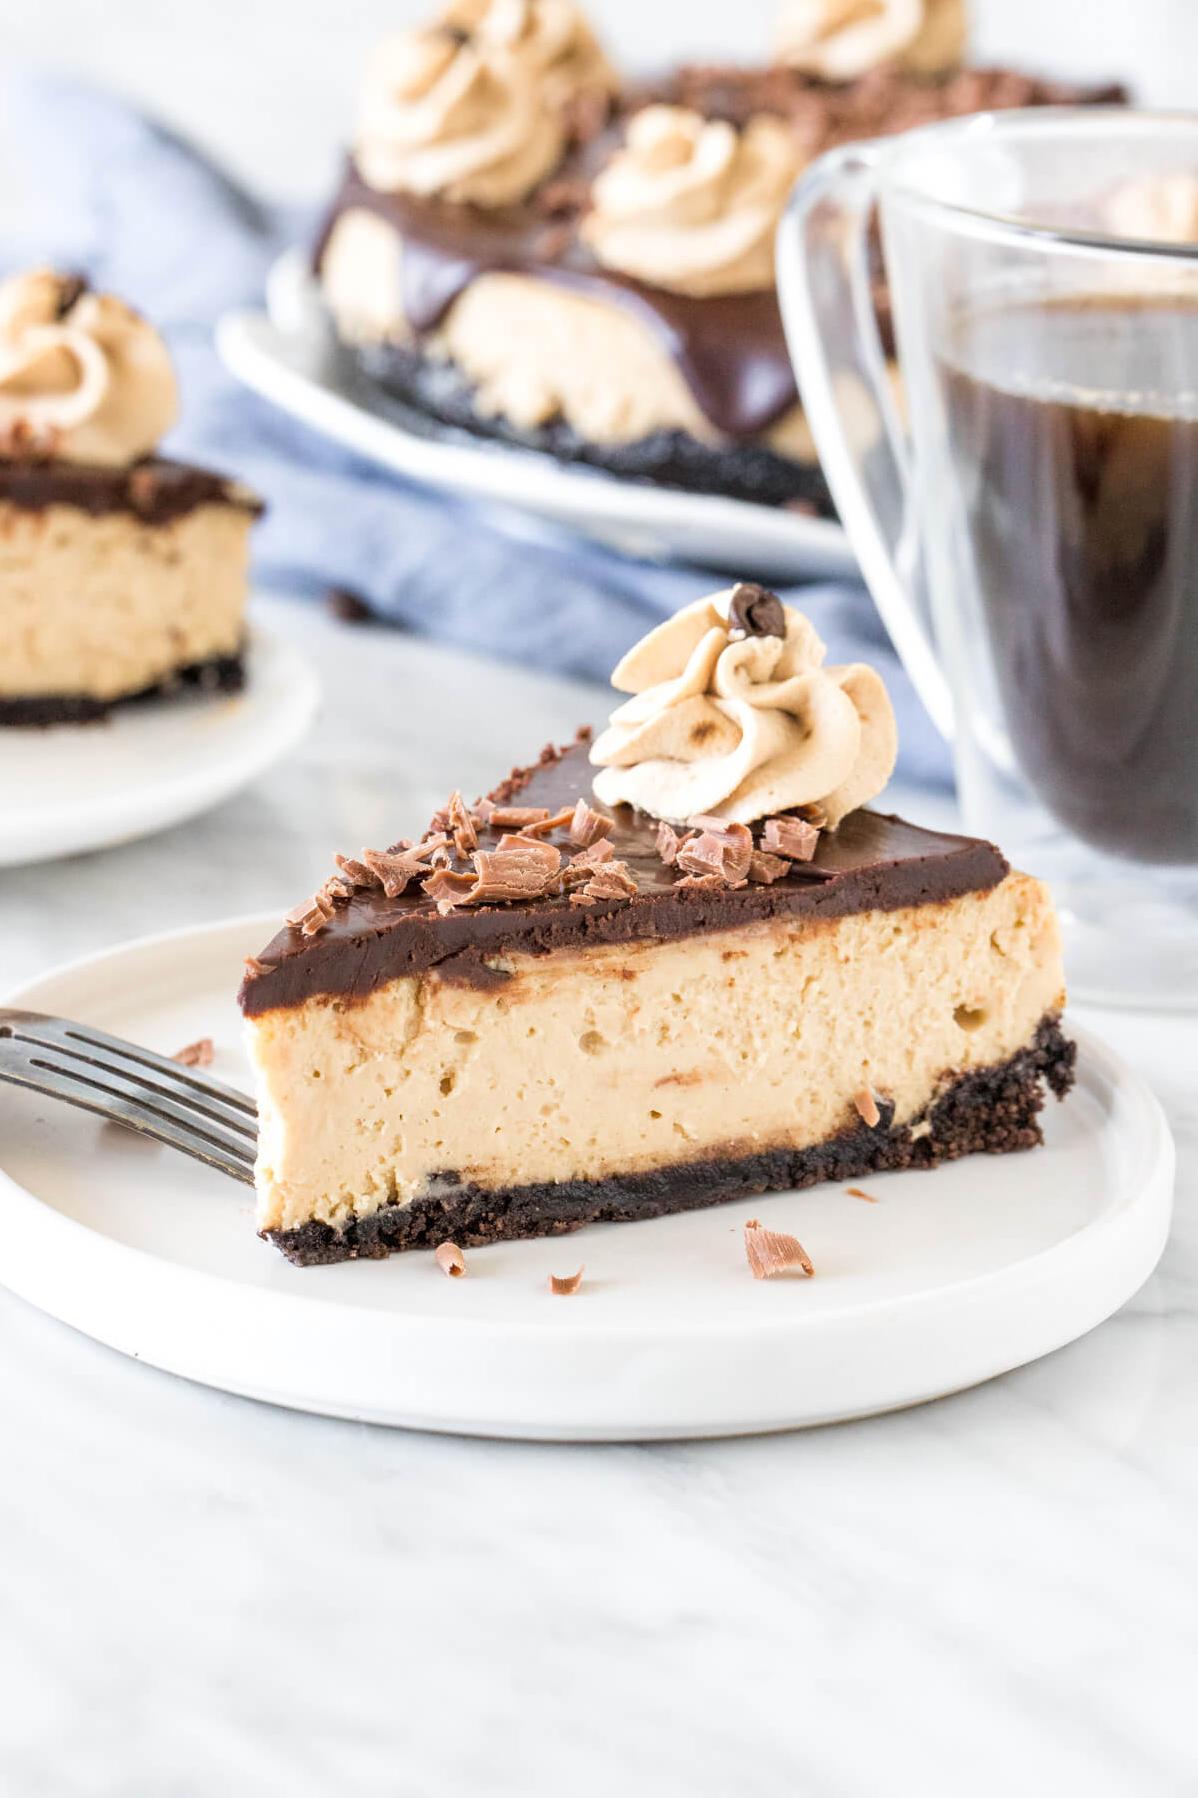  This is not your ordinary cheesecake!